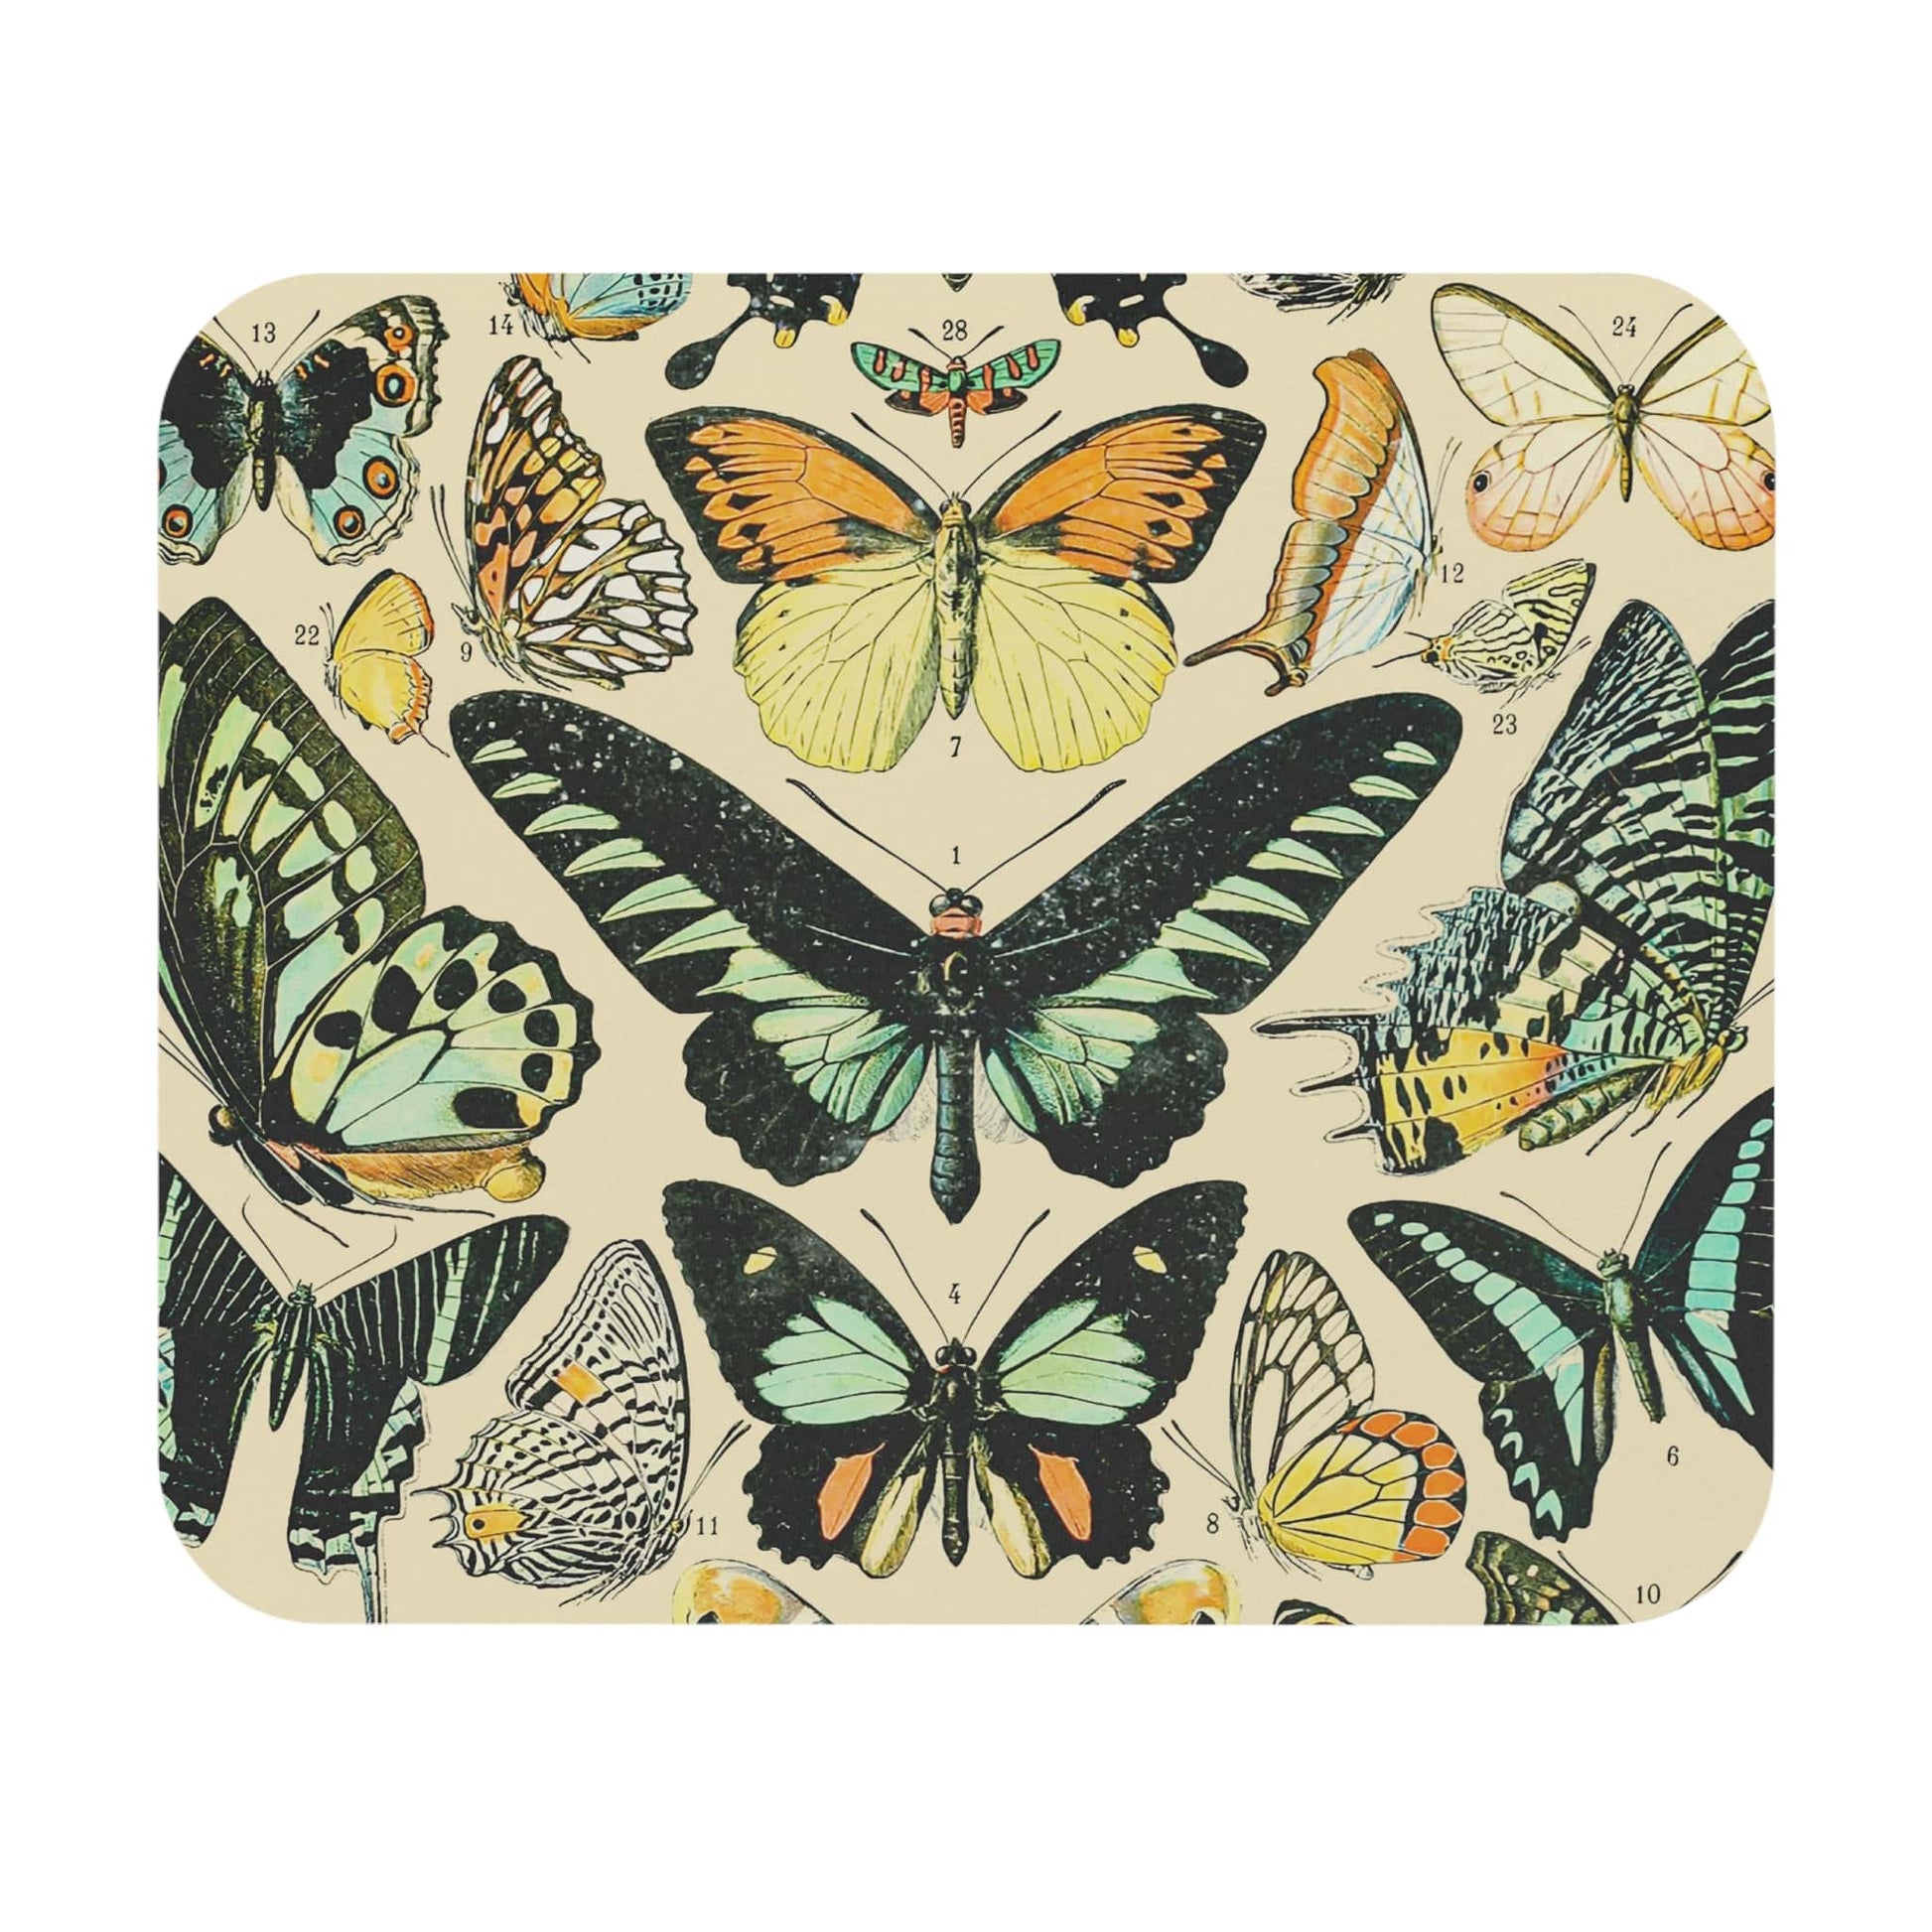 Butterflies and Moths Mouse Pad with cottagecore theme, desk and office decor showcasing charming insect artwork.